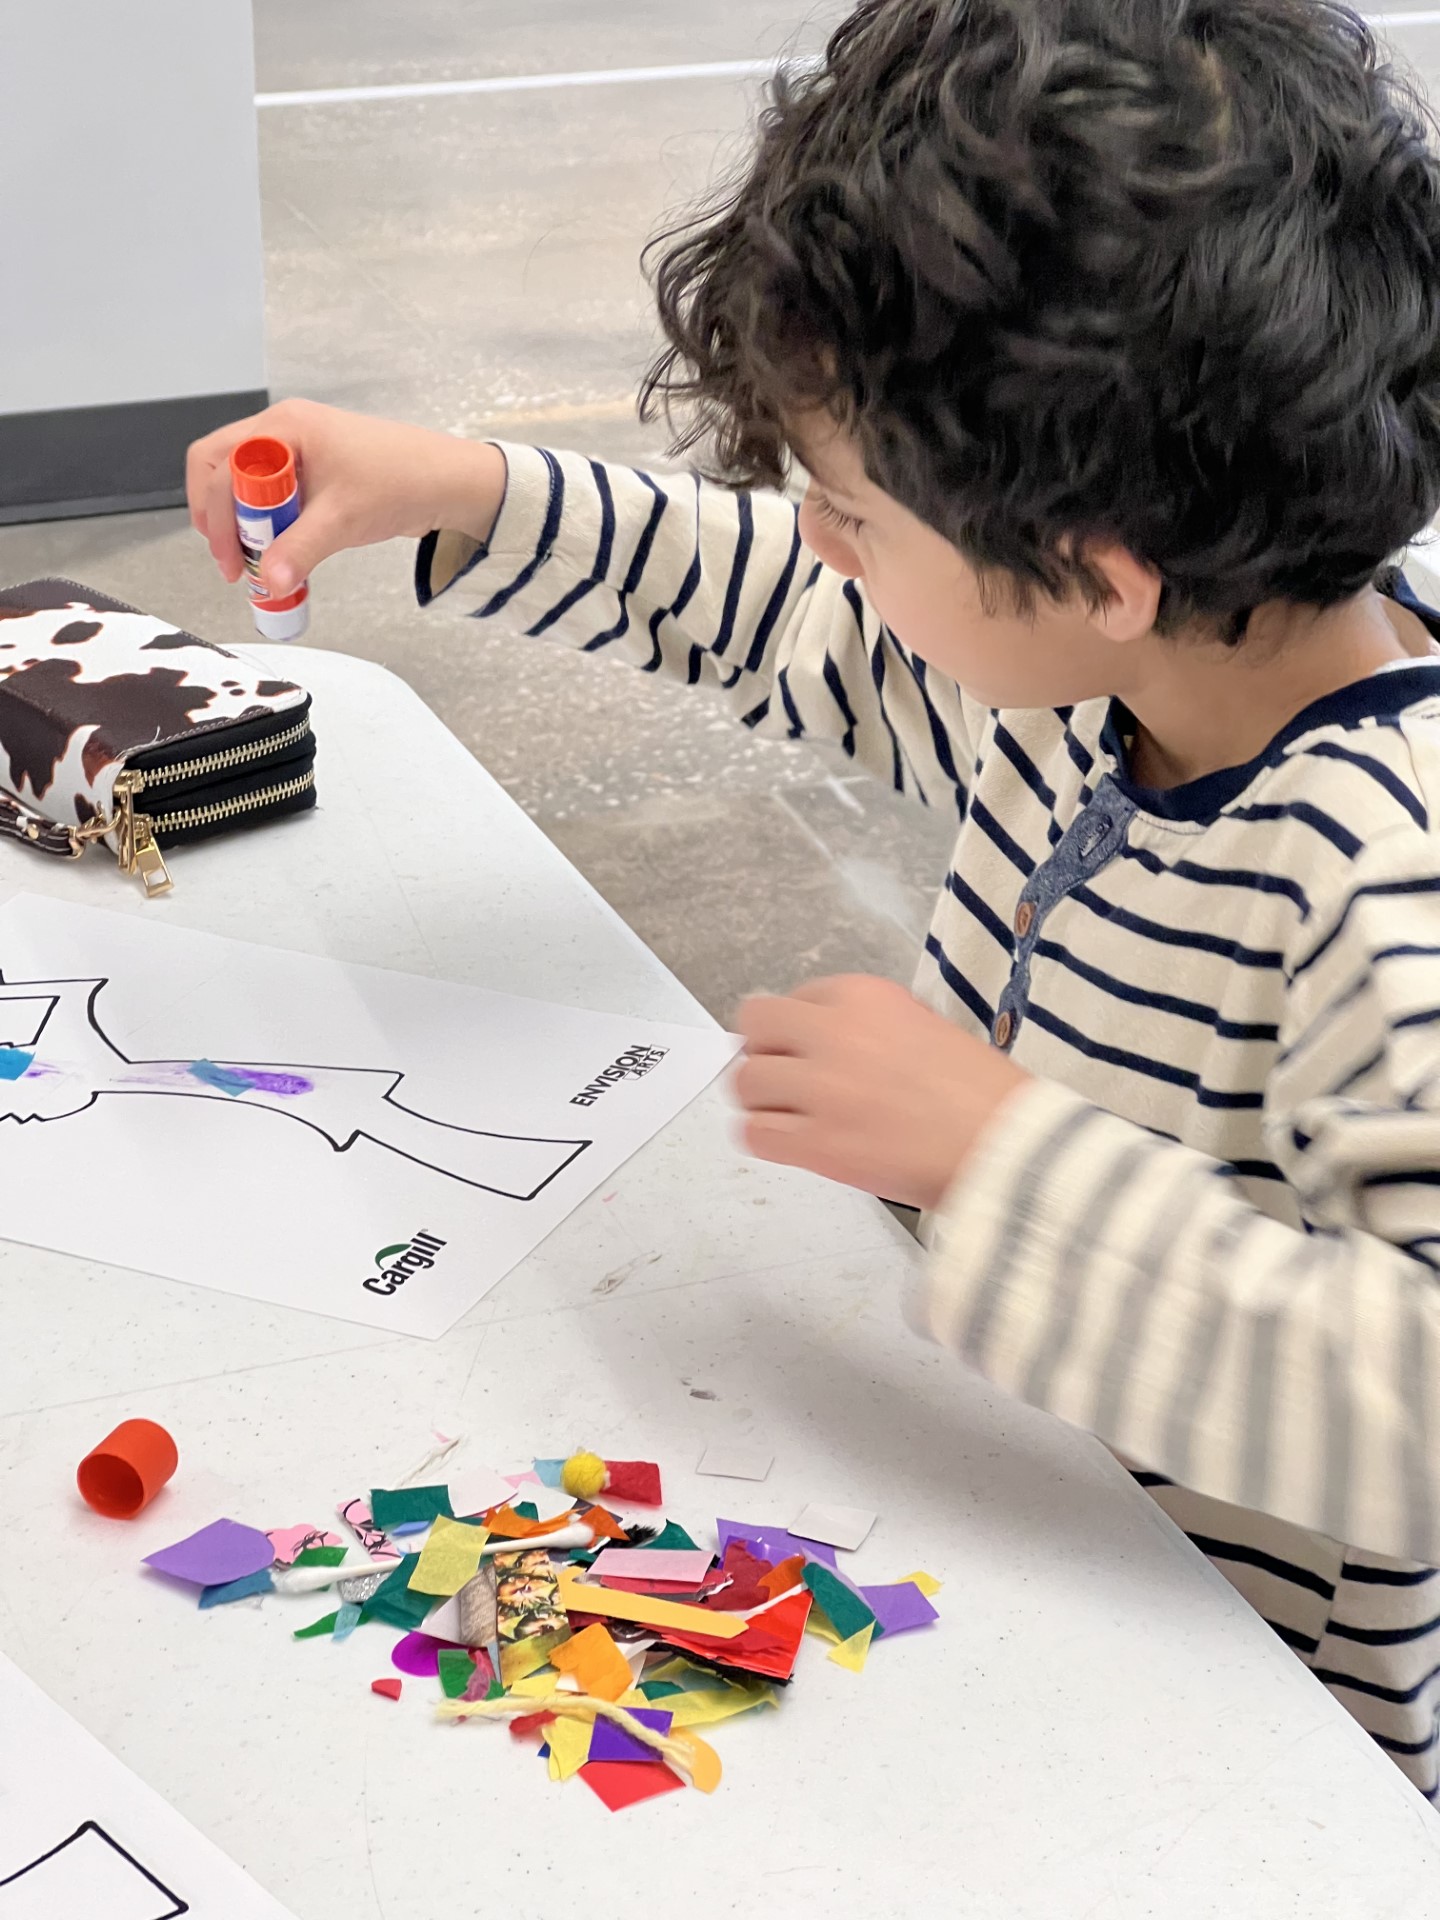 A young child making art.